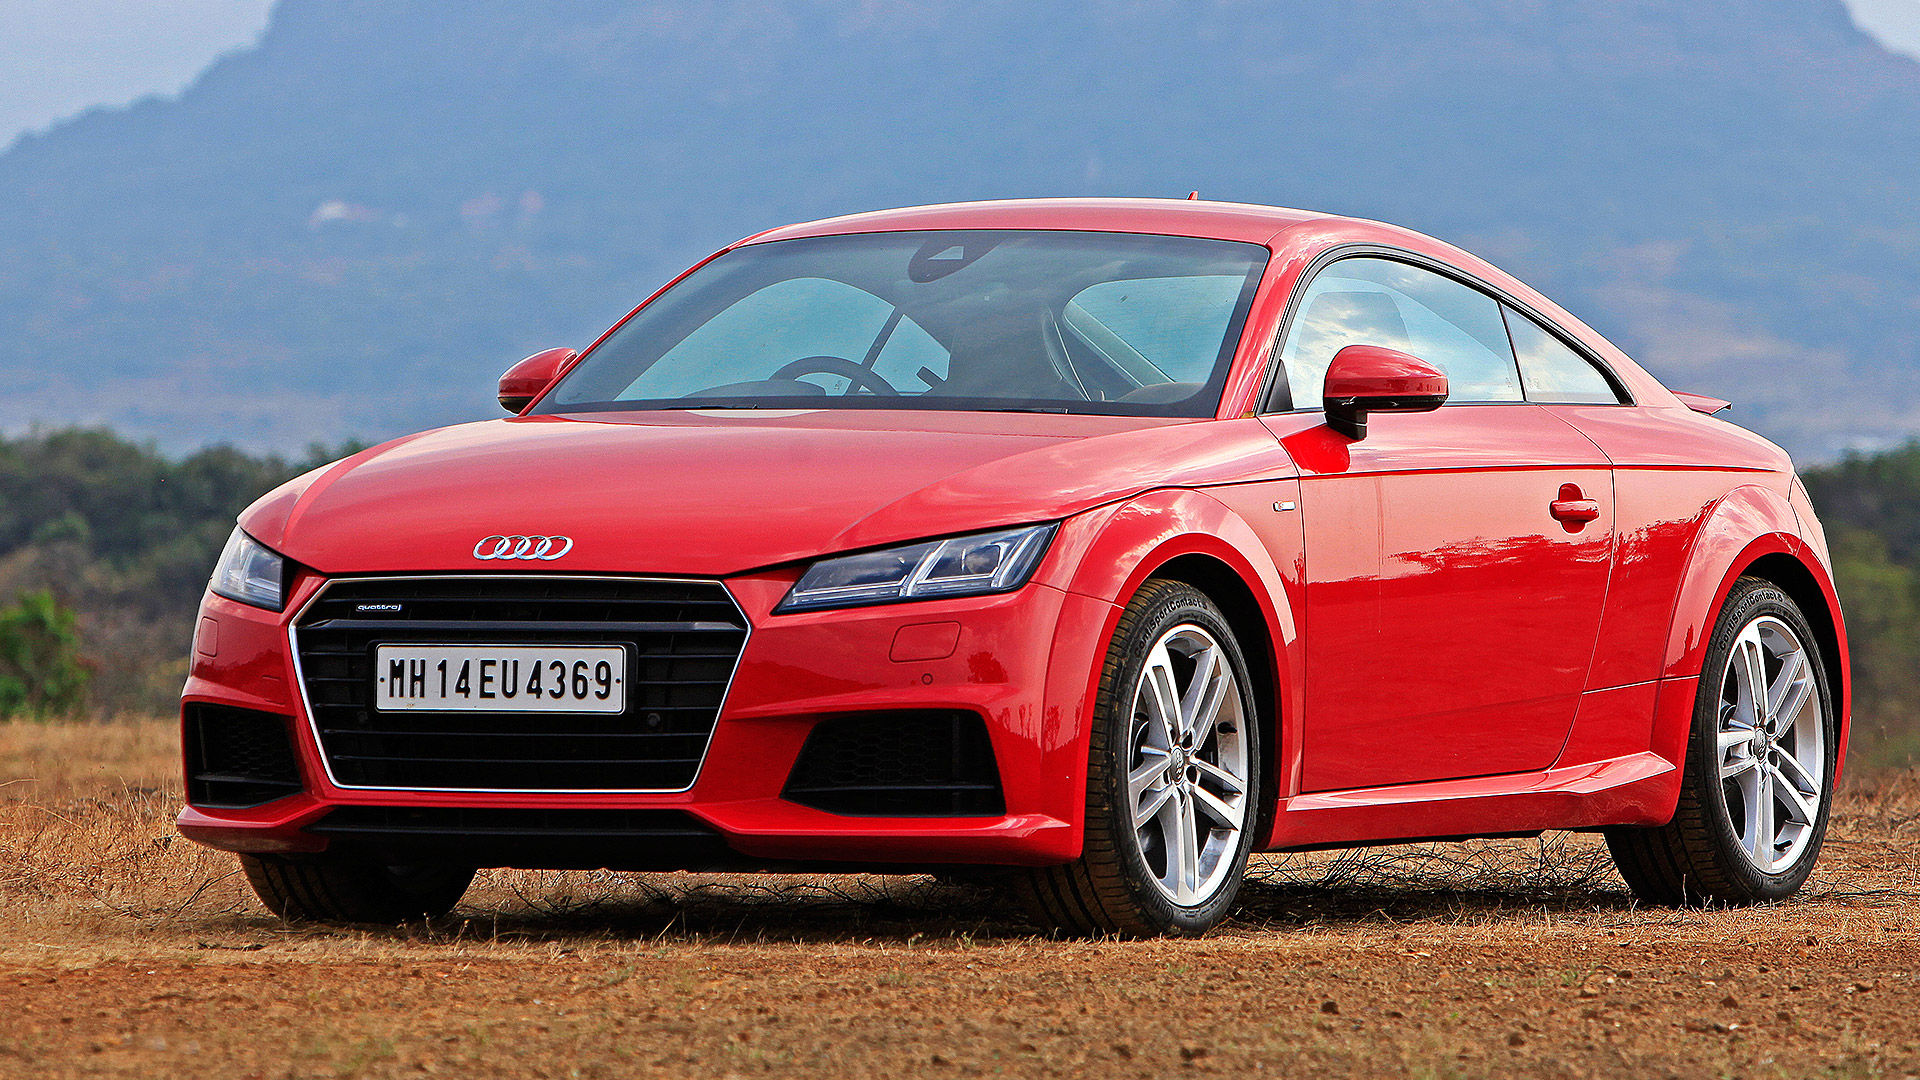 Audi TT 2015 45 TFSI - Price in India, Mileage, Reviews, Colours,  Specification, Images - Overdrive